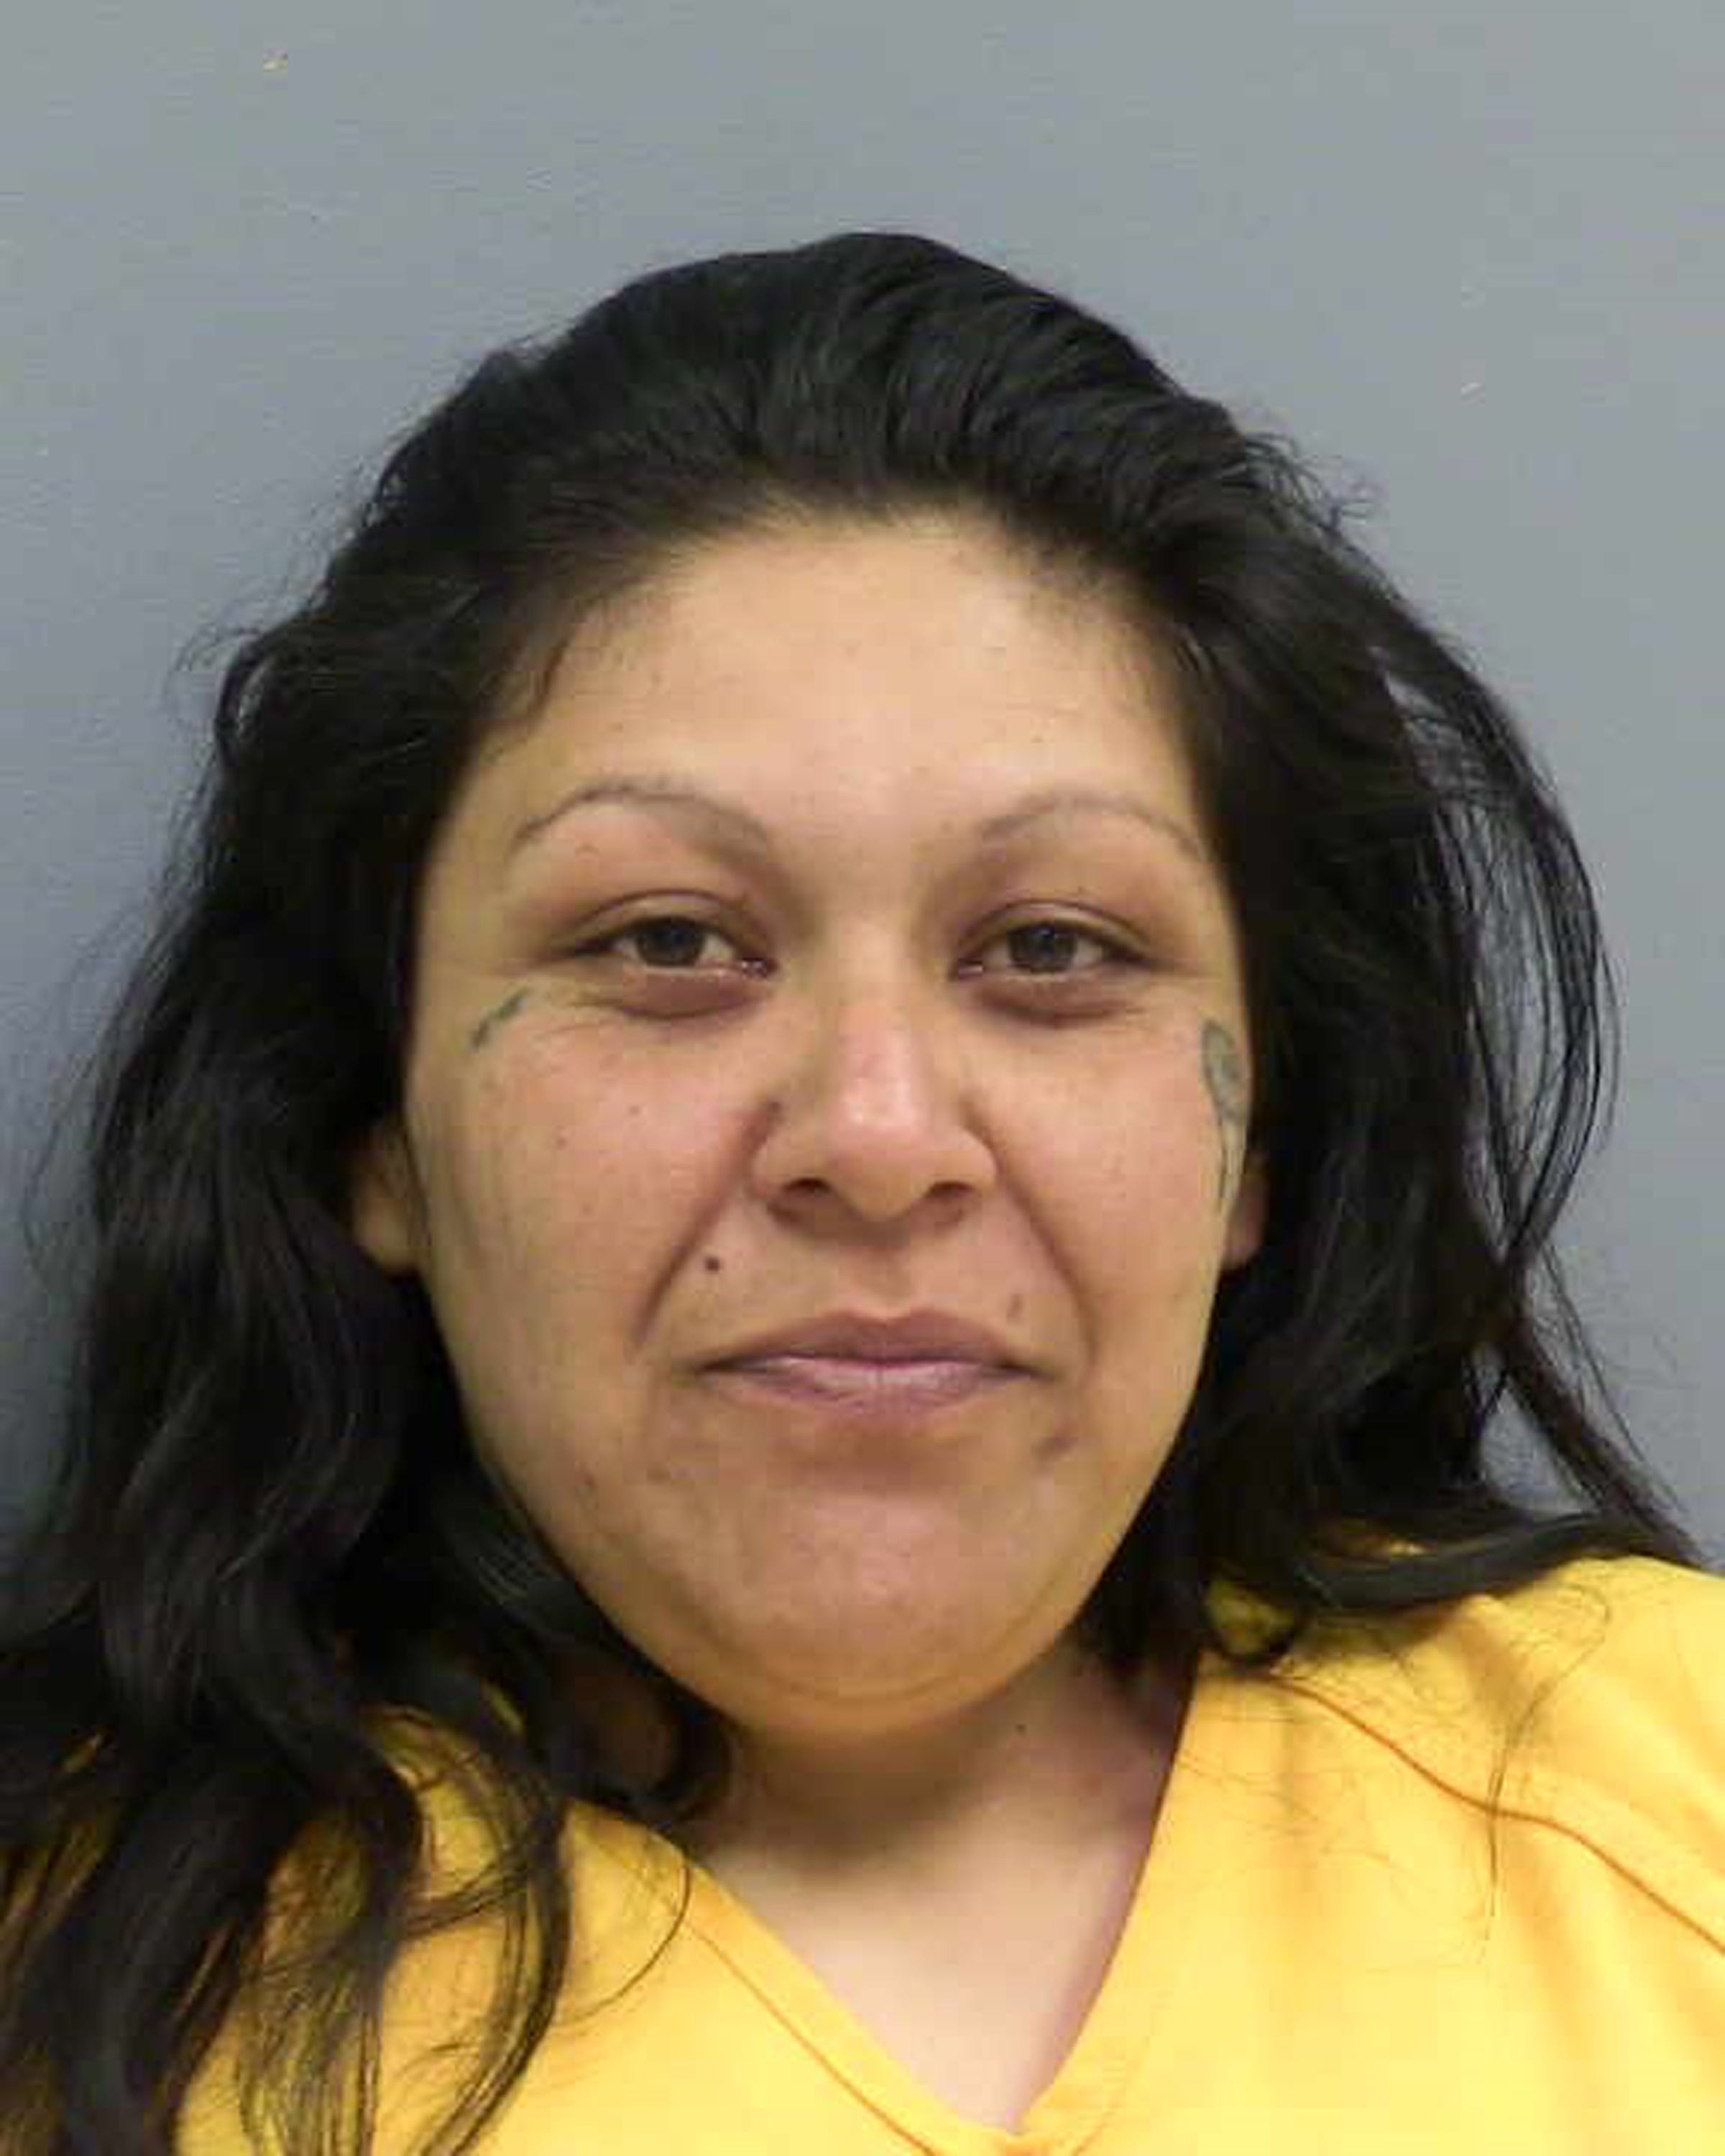 Trial For New Mexico Mom In Son Incest